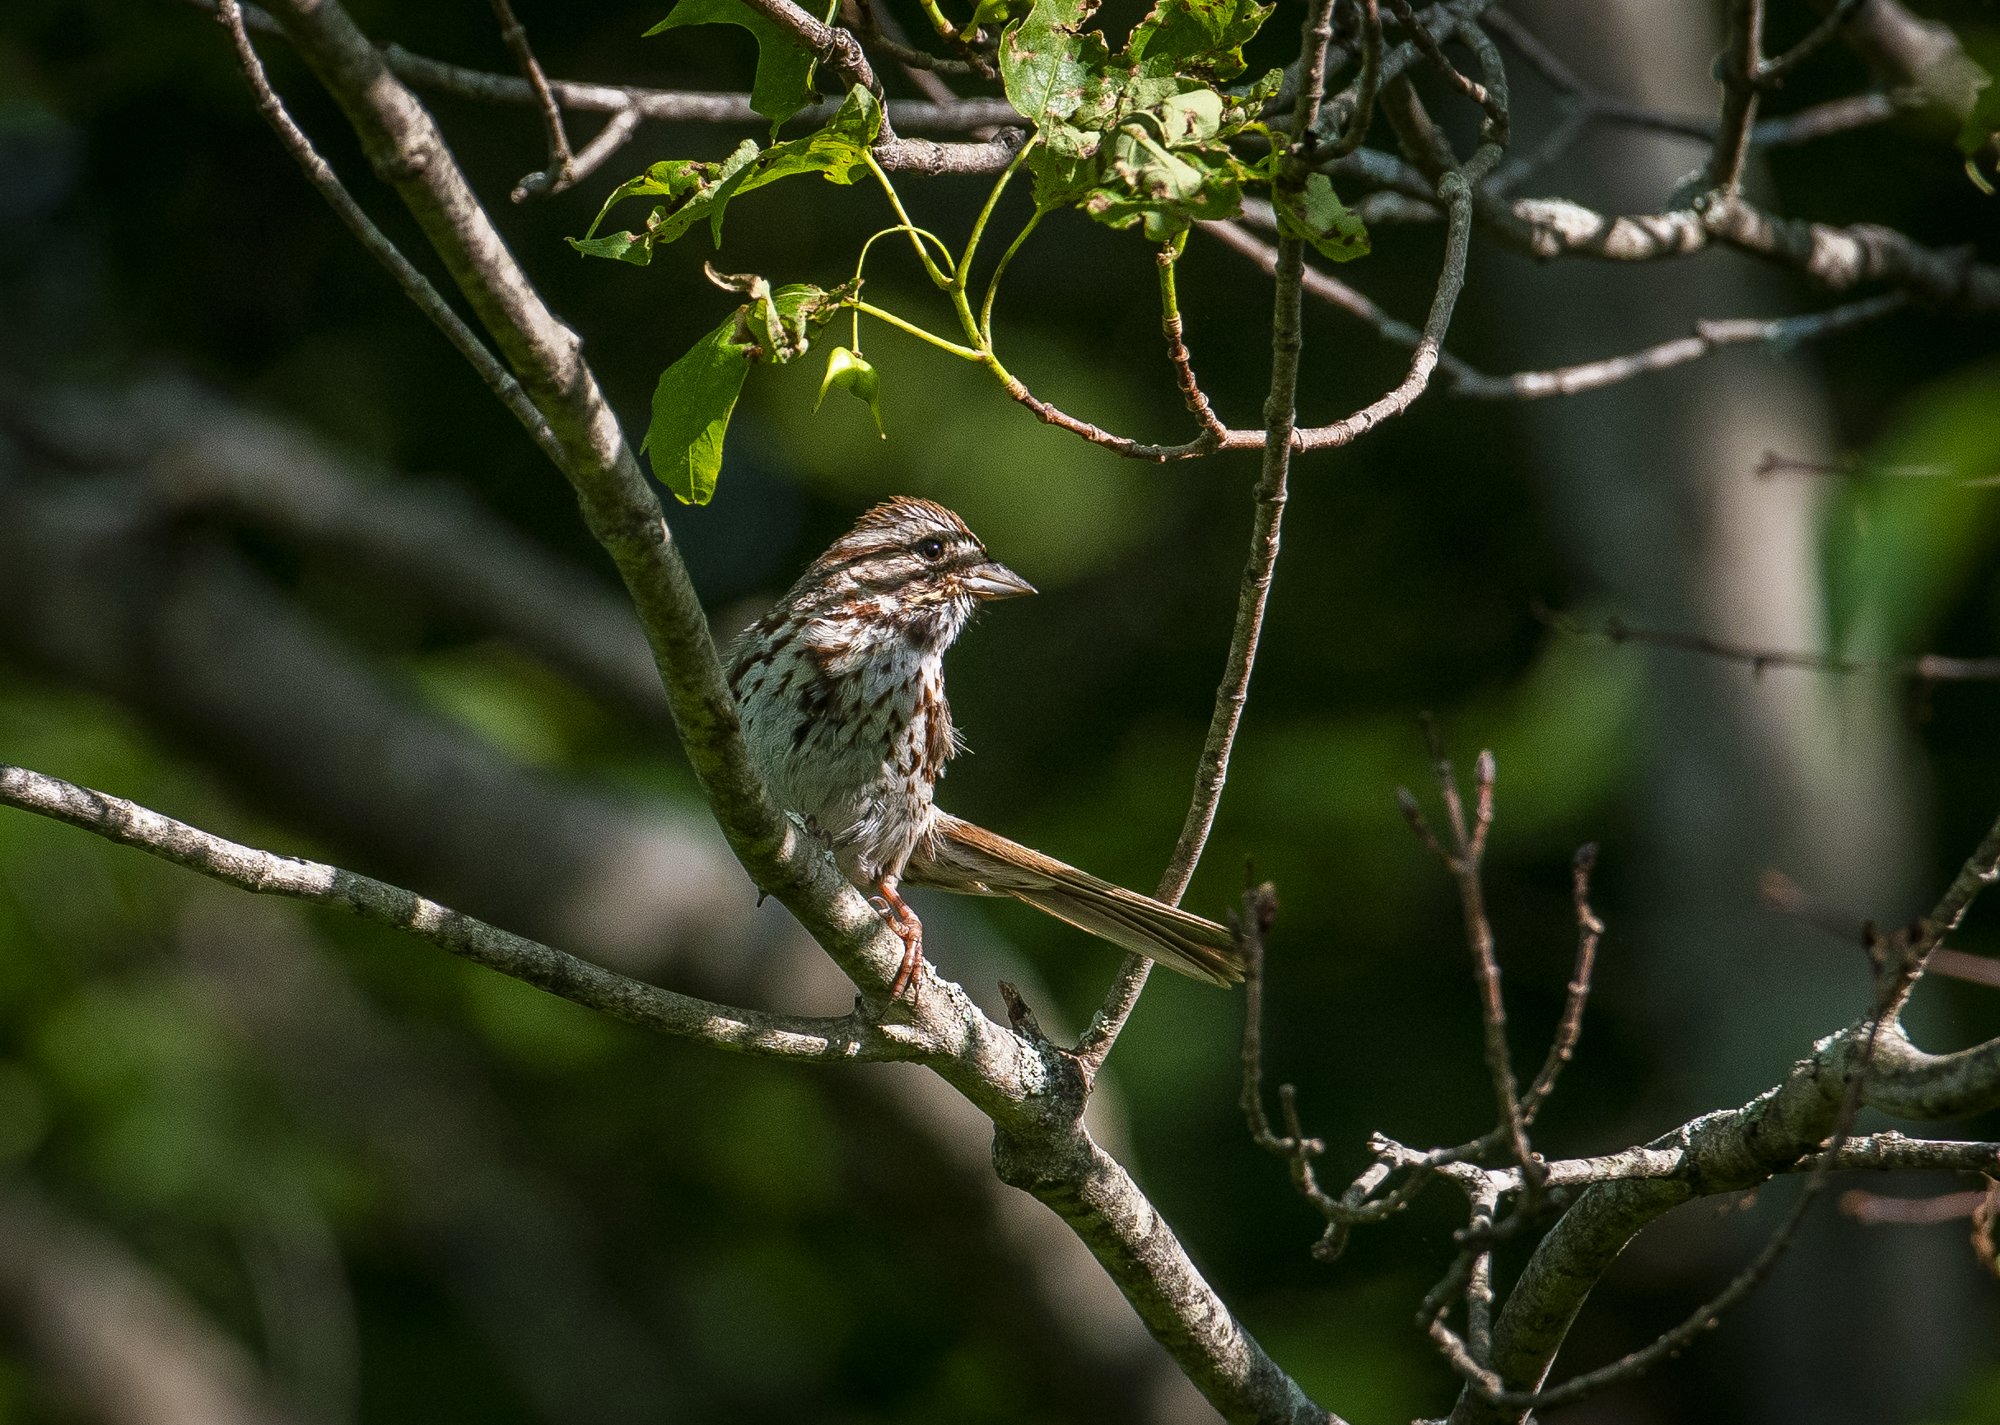  A song sparrow in Dover, New Hampshire.  